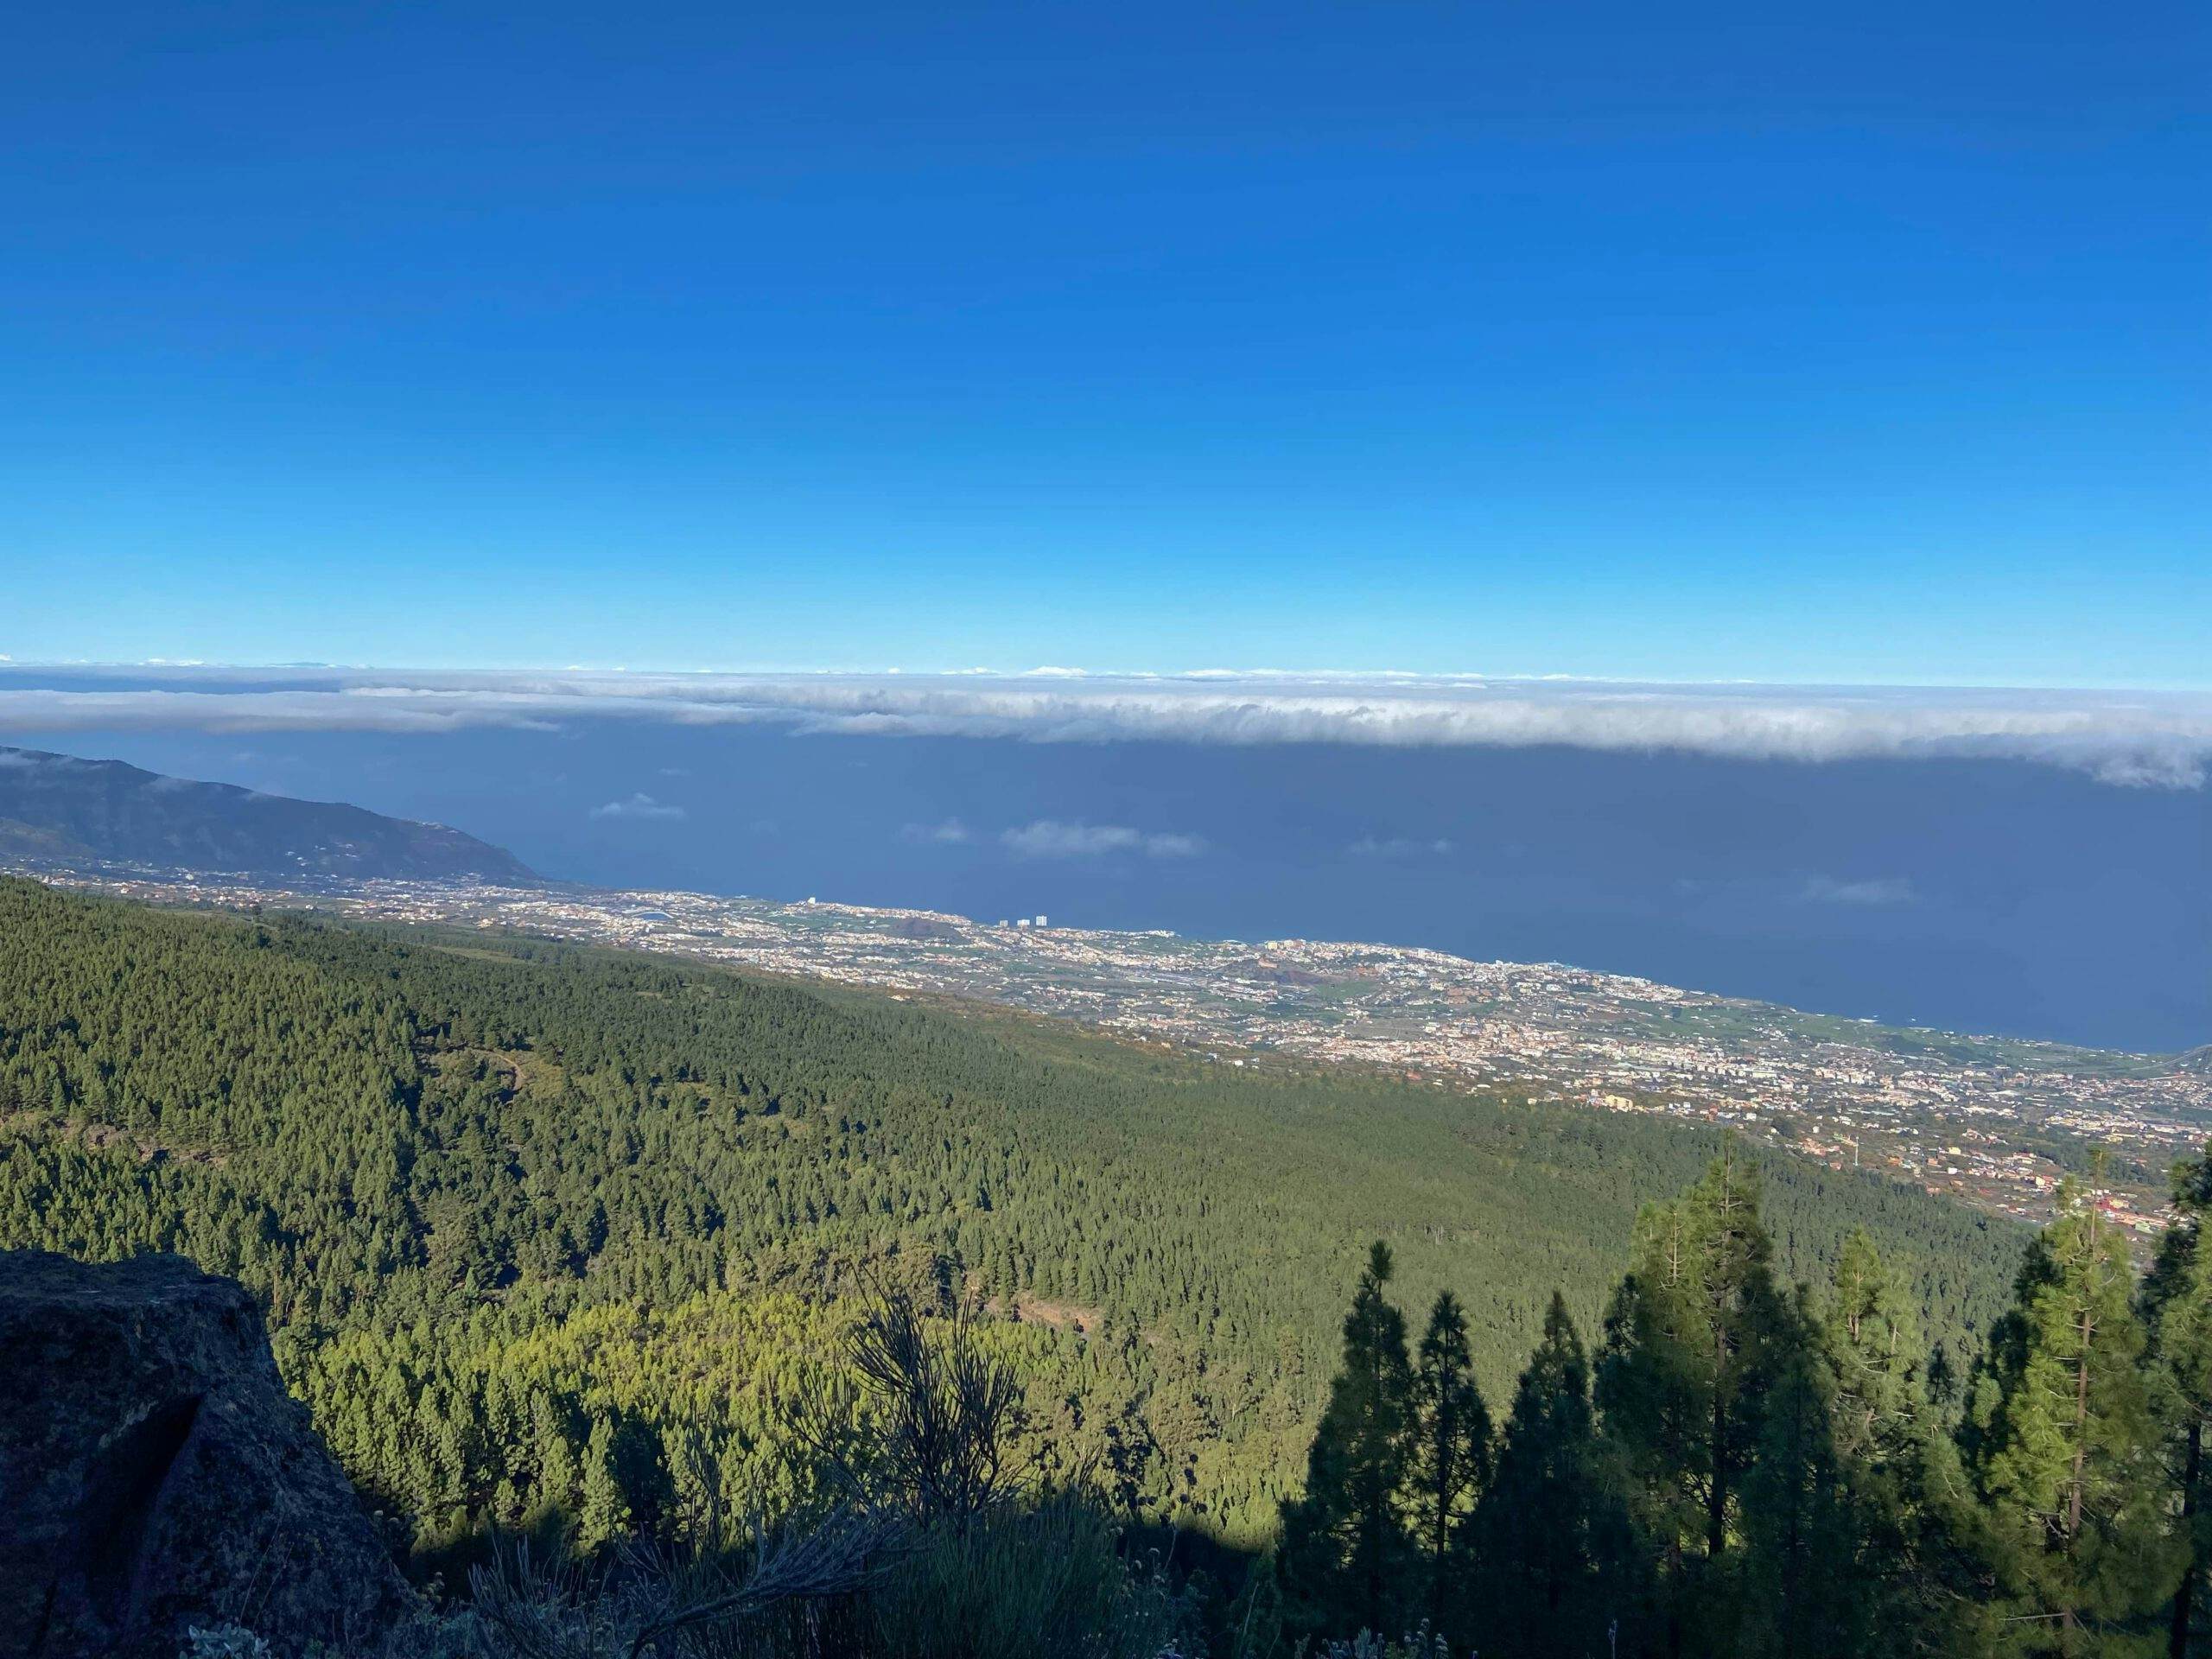 View from the heights back over the forests of the Orotava valley to the coast